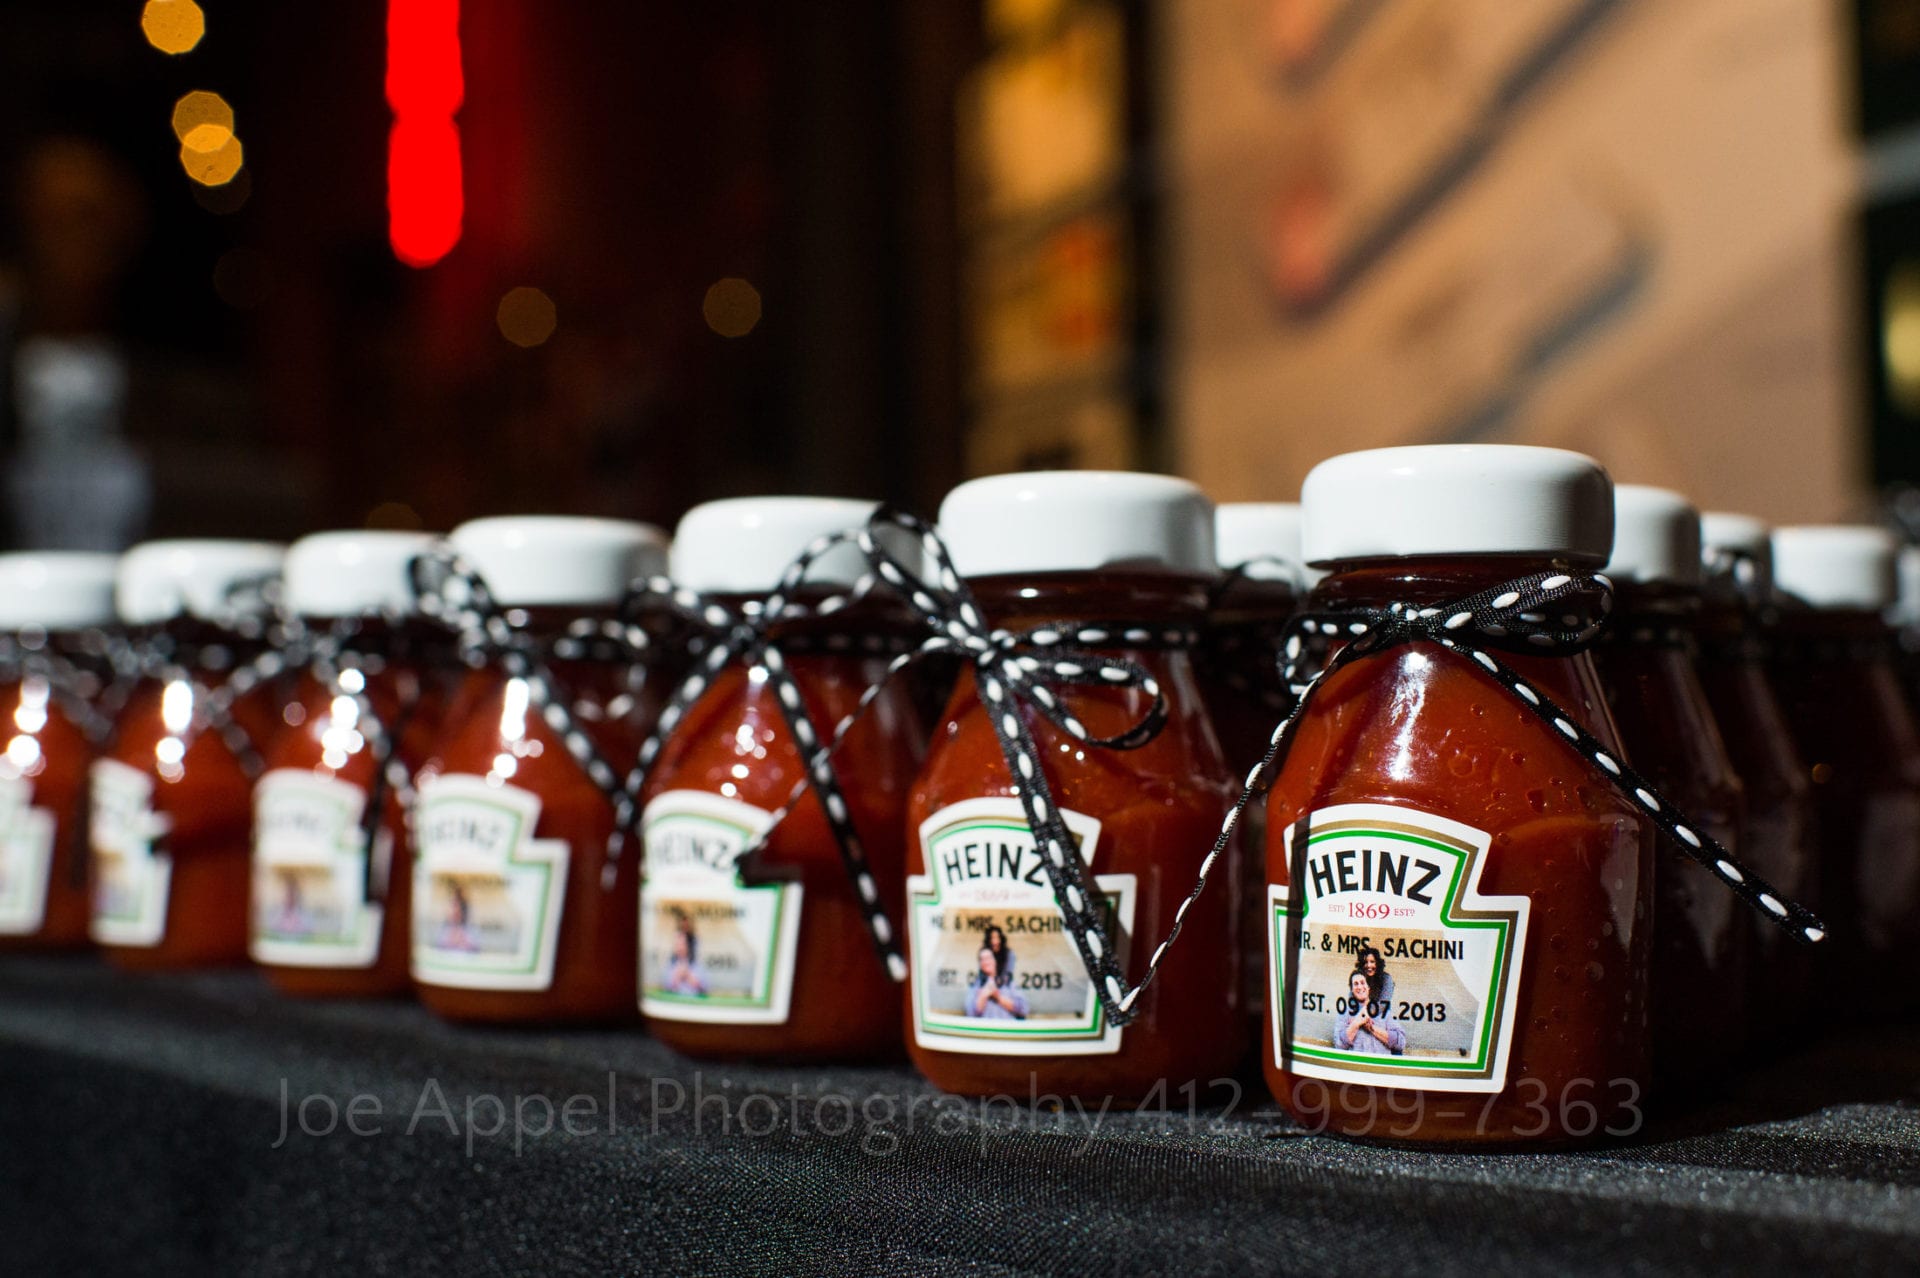 small ketchup bottles with personalized labels are favors for guests at a wedding.